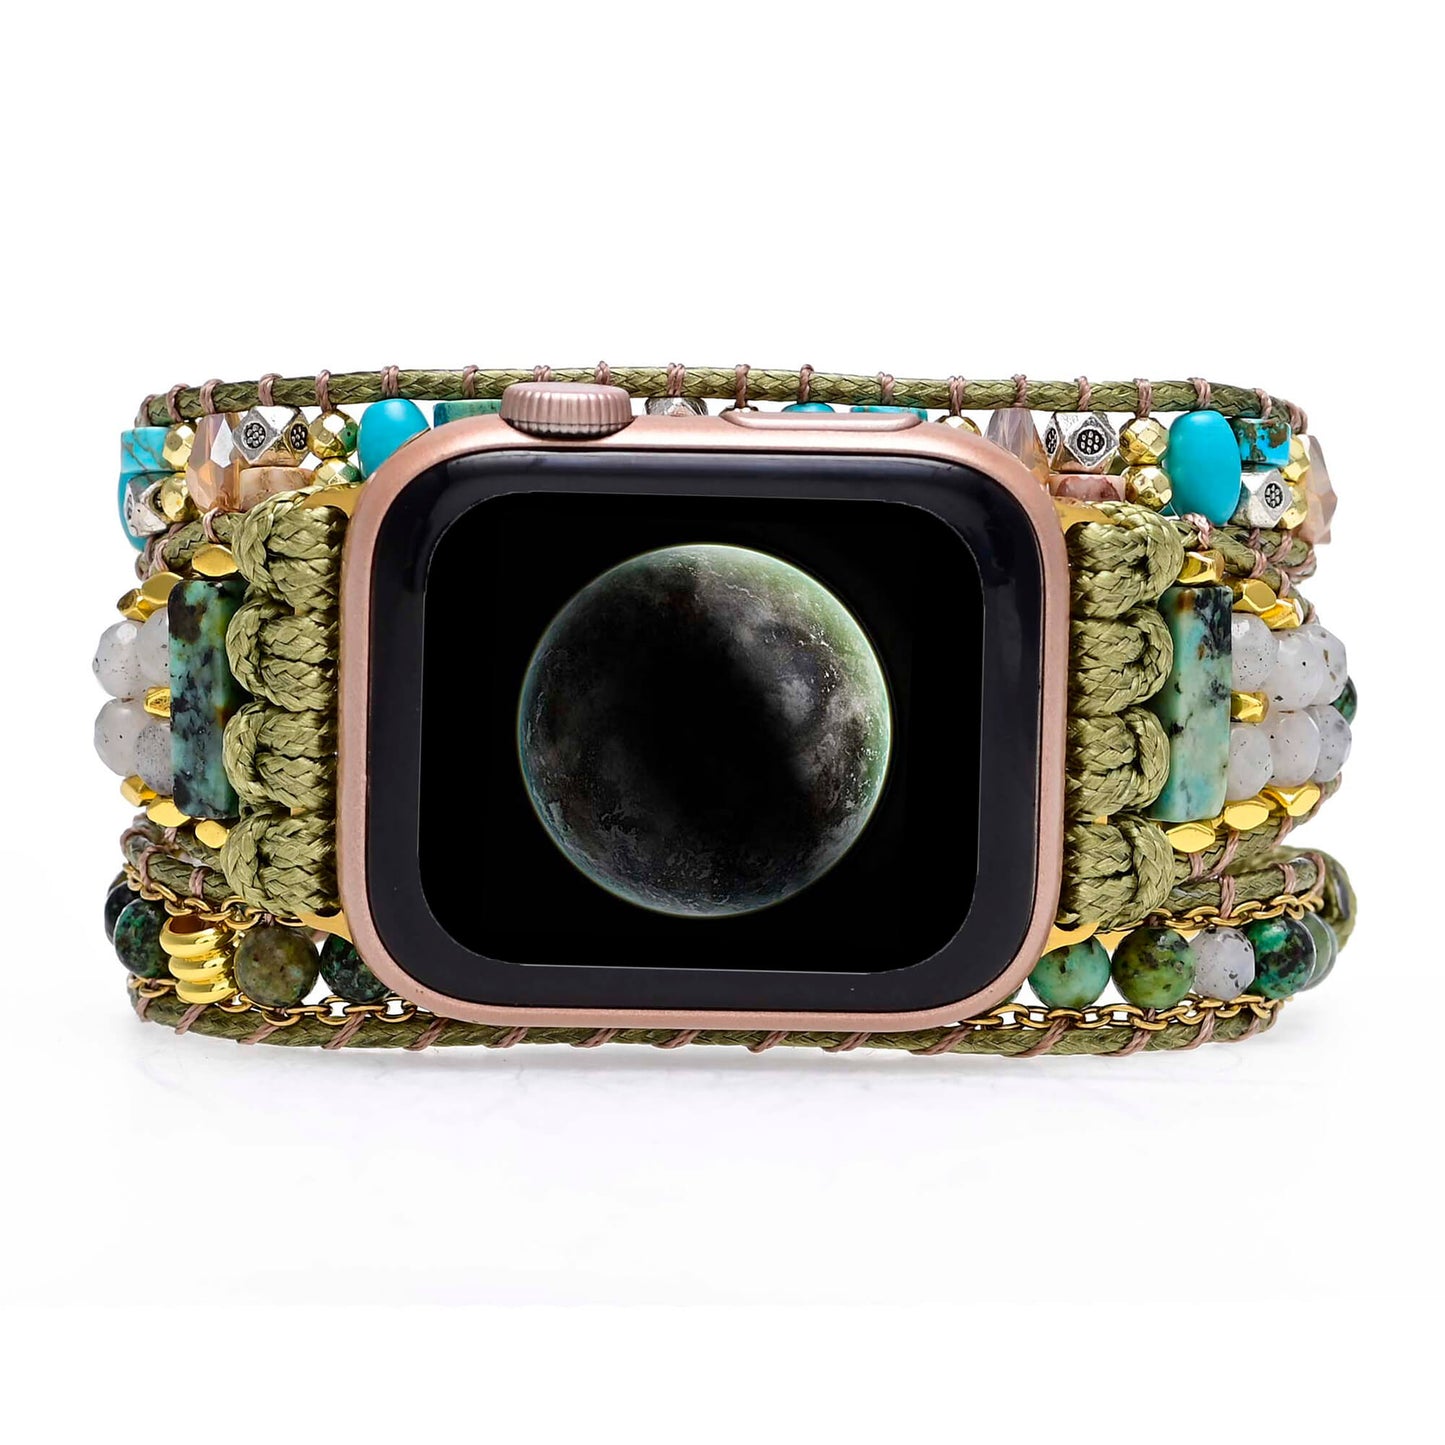 MantraChakra Emperor Stones, Hematite's and South Africa Turquoise Apple Watch Bracelet with Chain